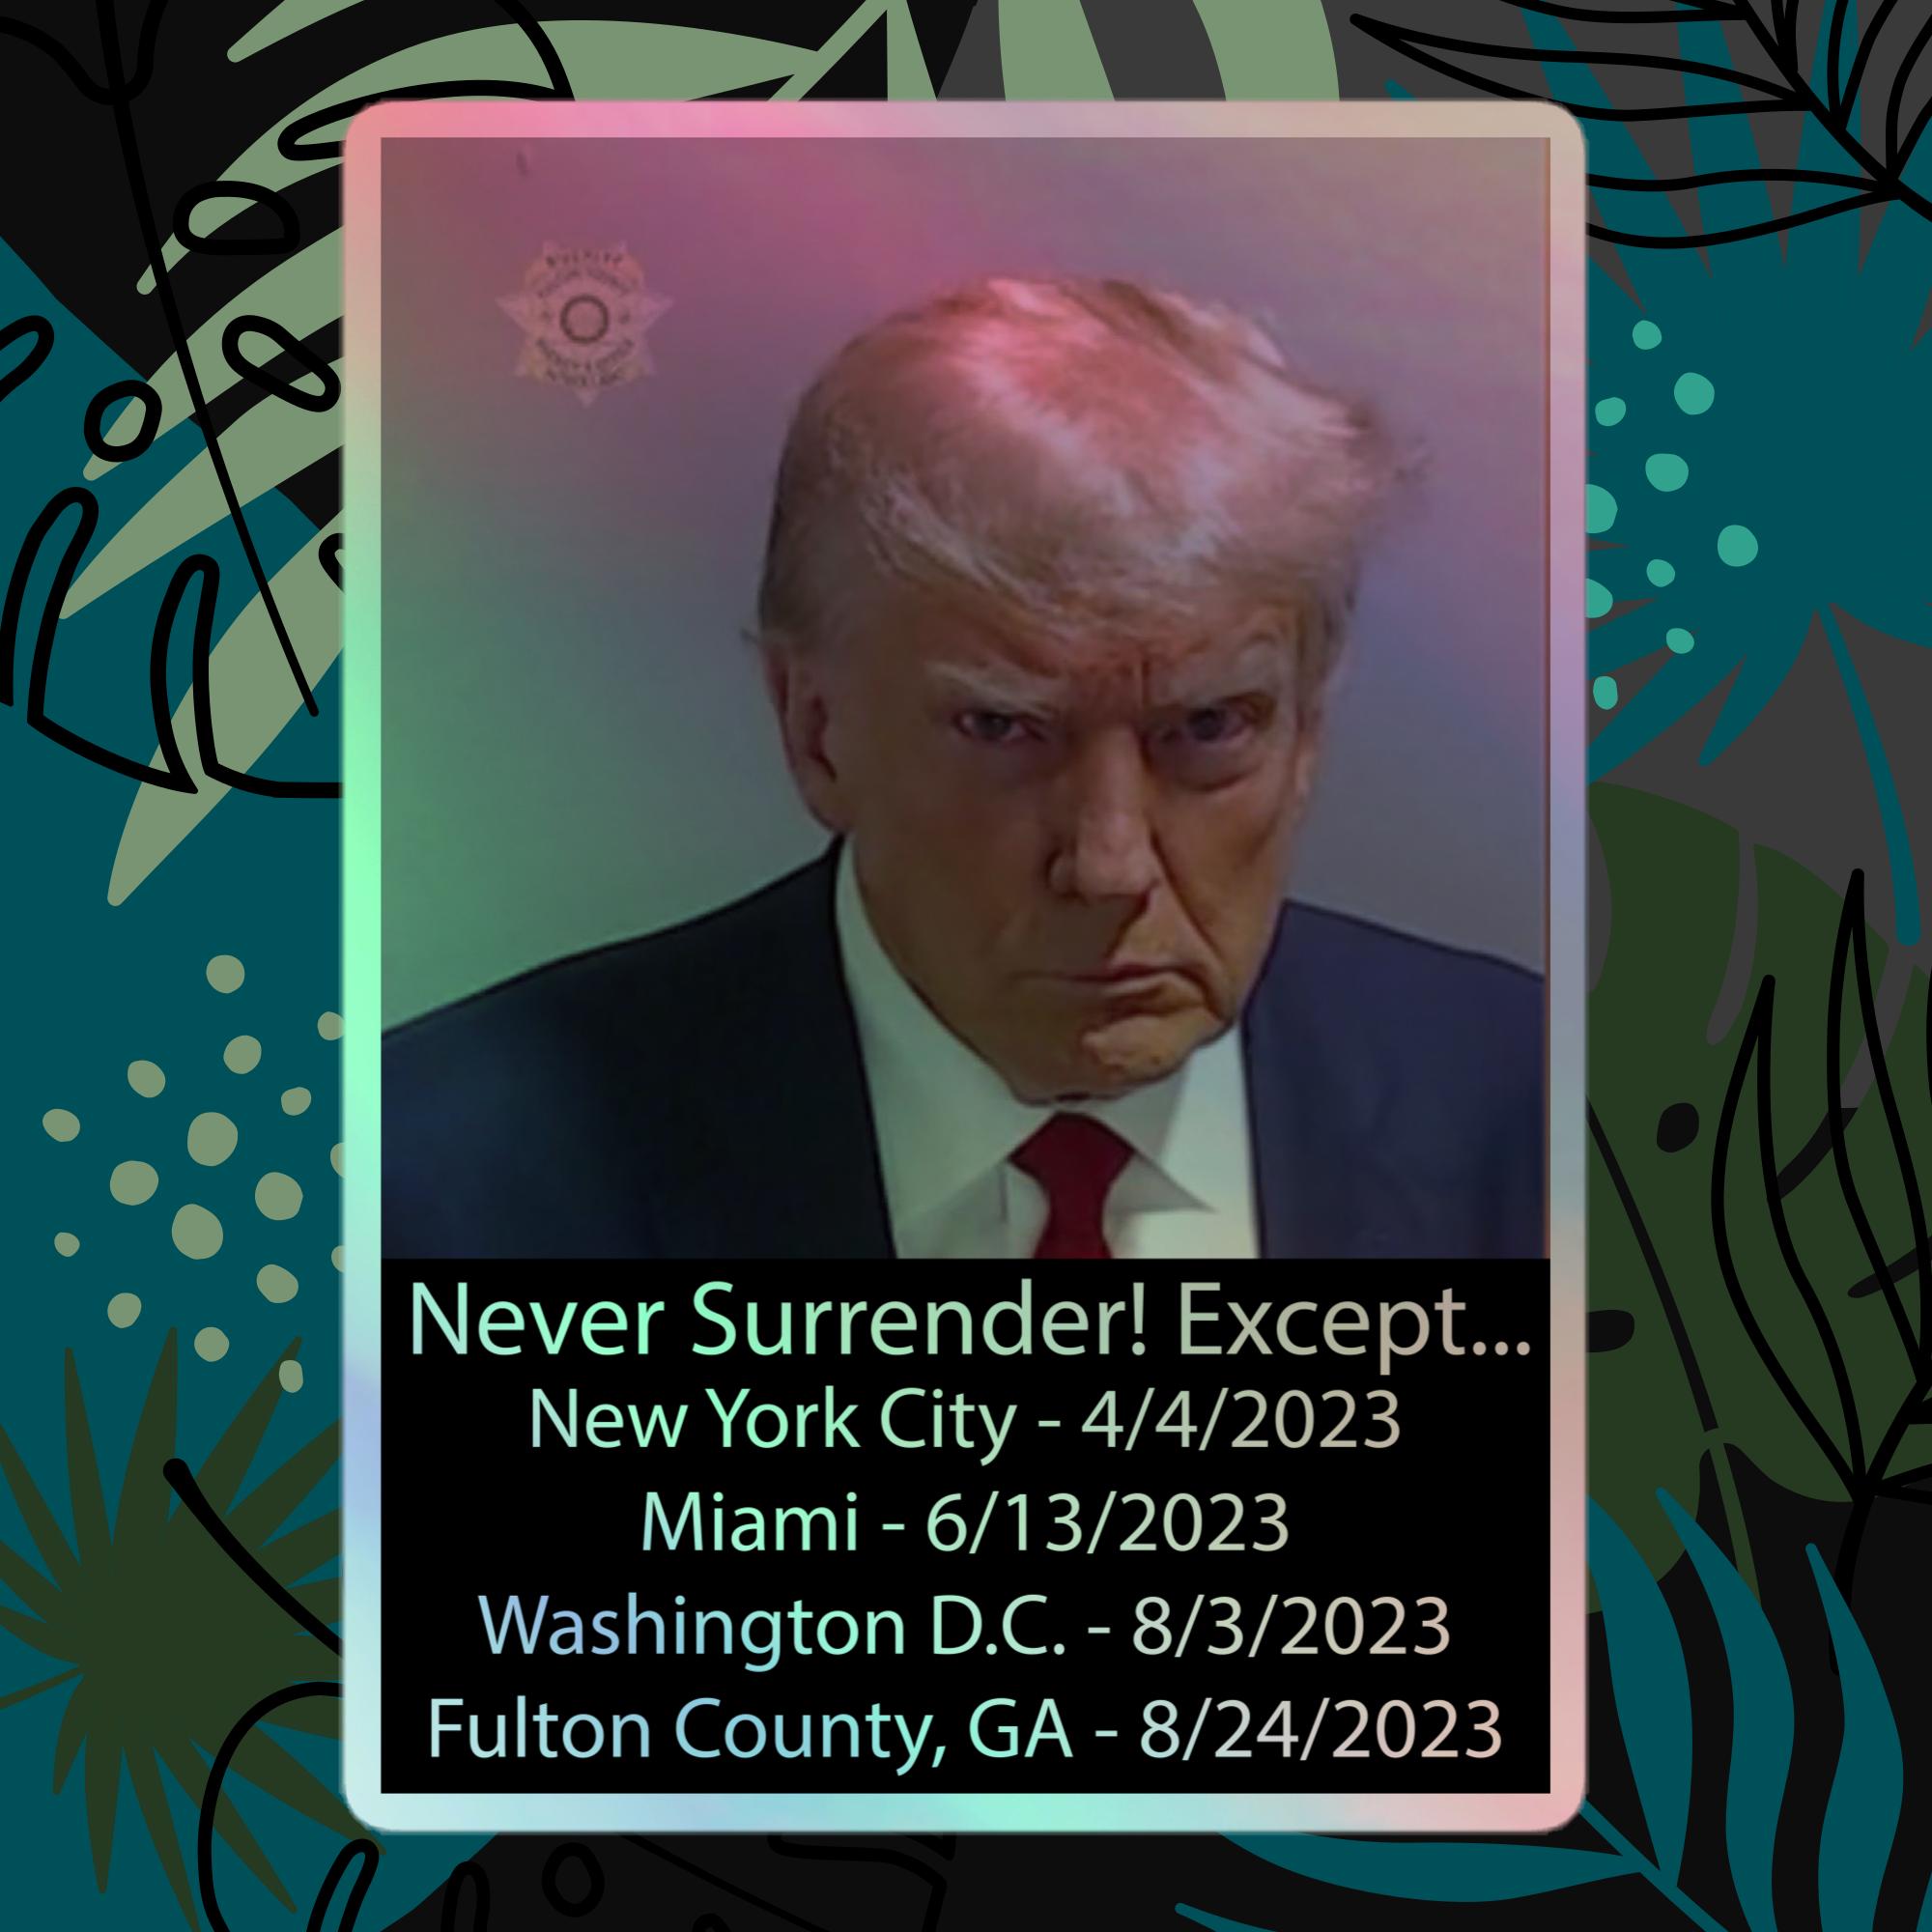 Never Surrender!... Except for the 4 times Trump surrendered.